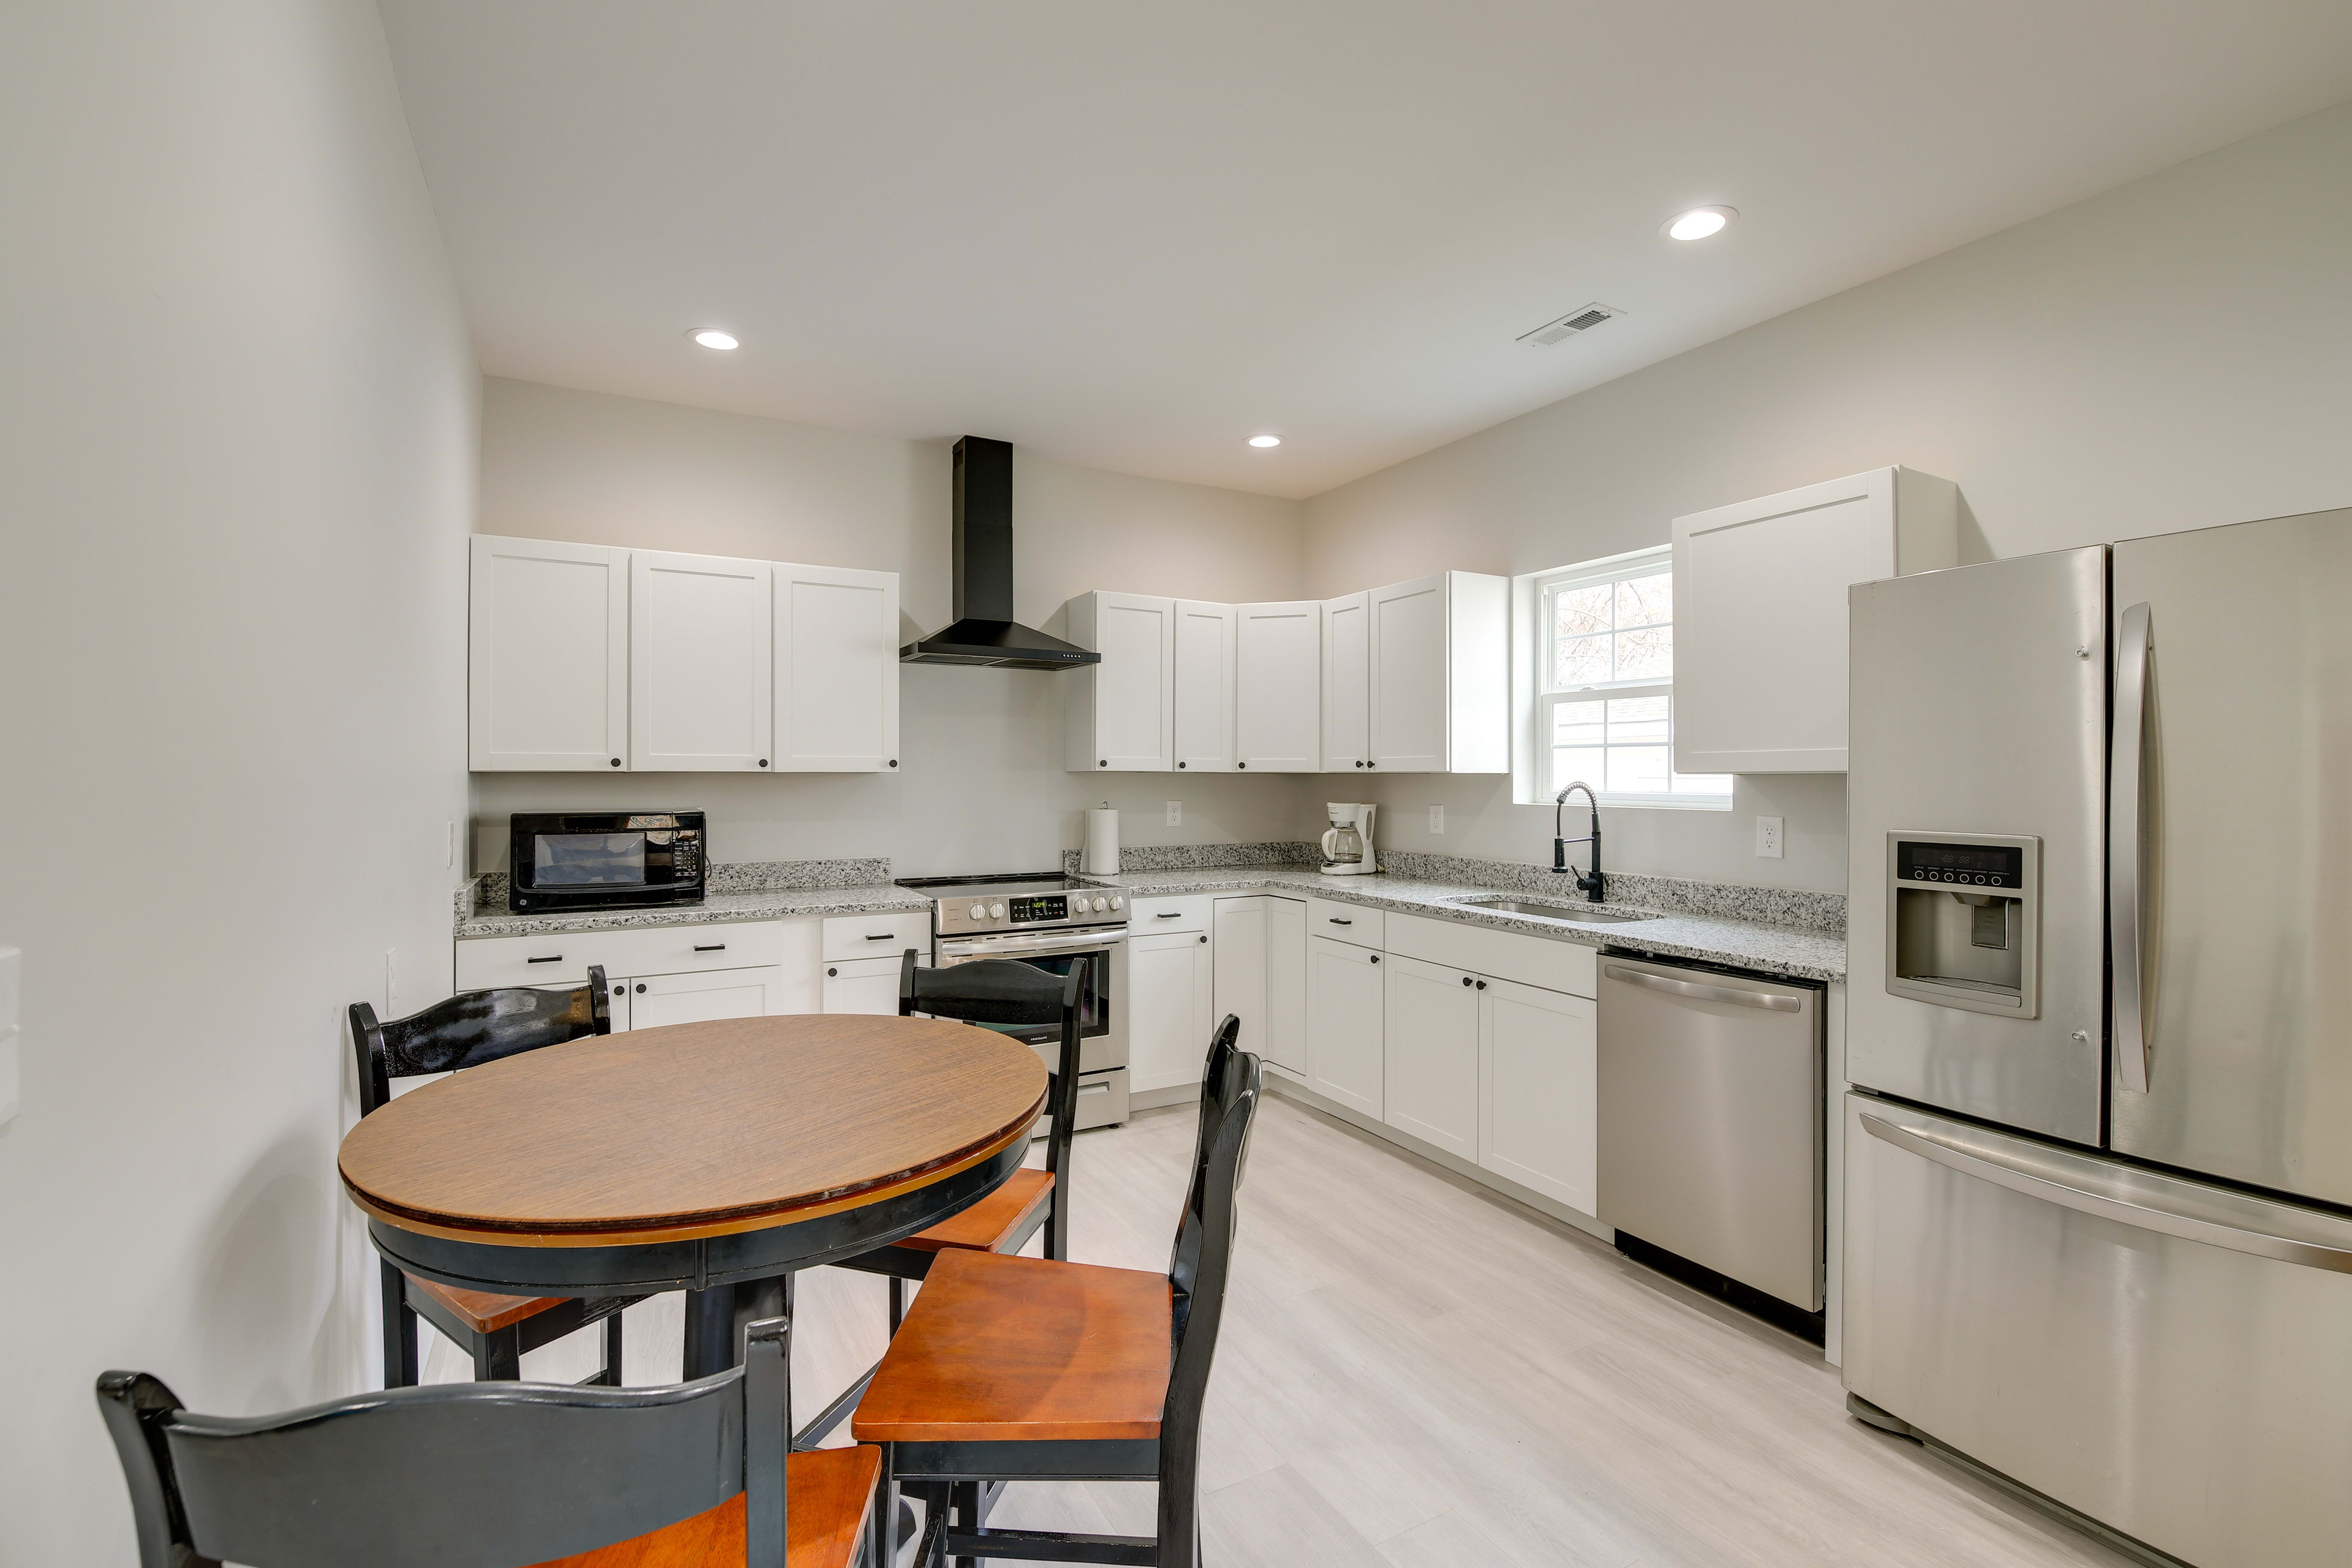 Kitchen | Pets Welcome w/ Fee | Central Air Conditioning | Free WiFi